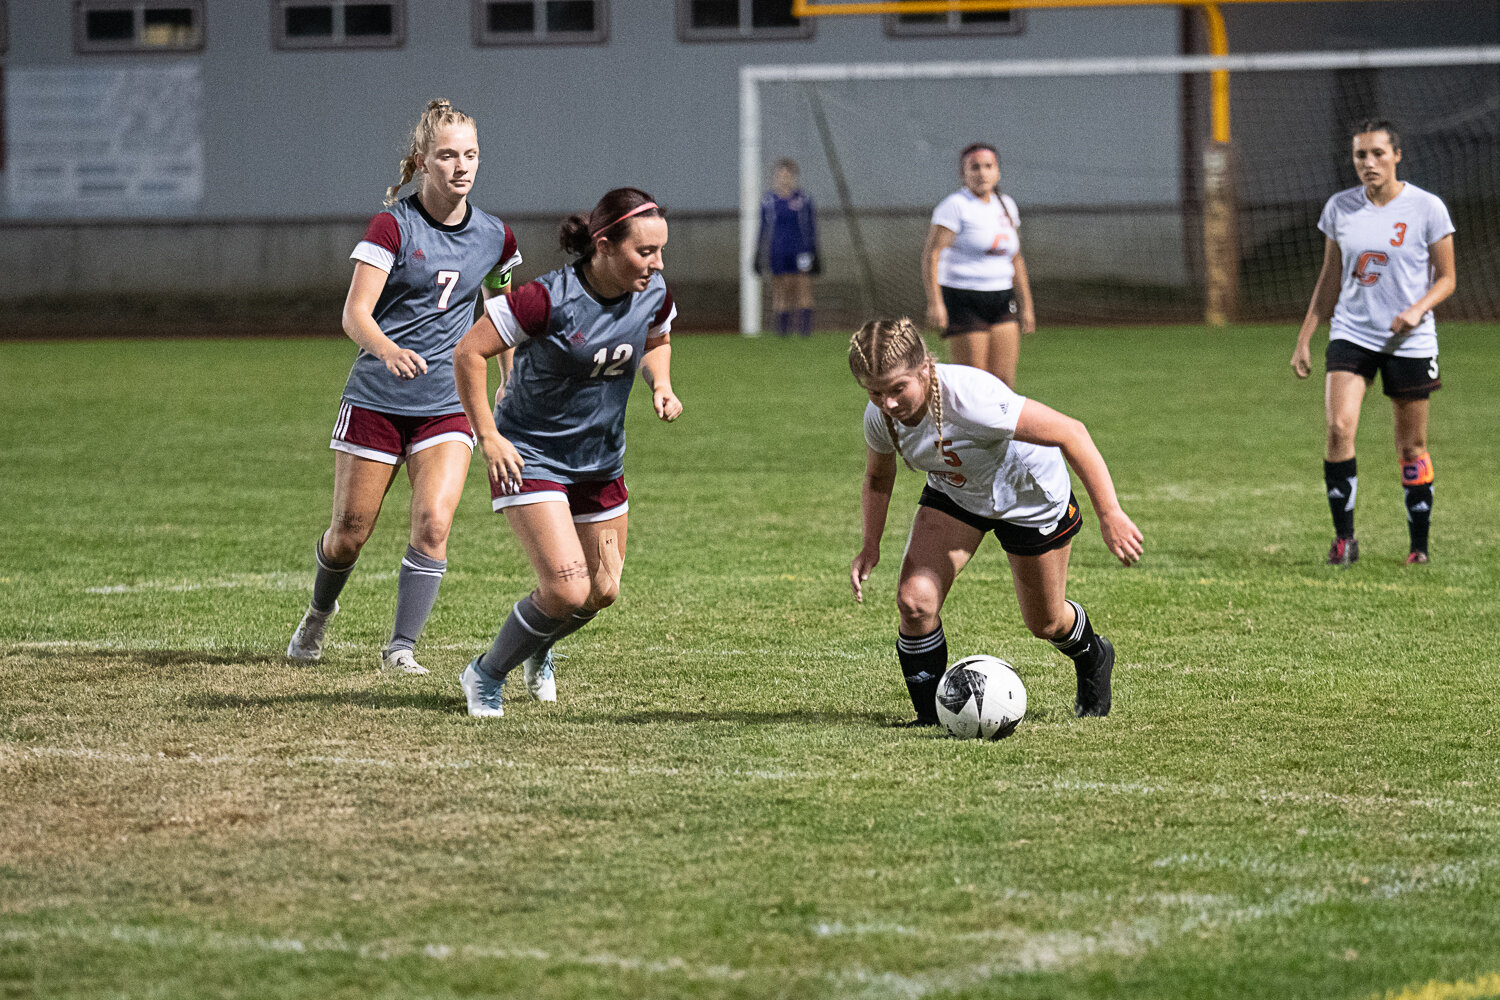 W.F. West's Kylee Breen closes in on Centralia's Eva Reinitz during the two team's matchup on Sept. 21.